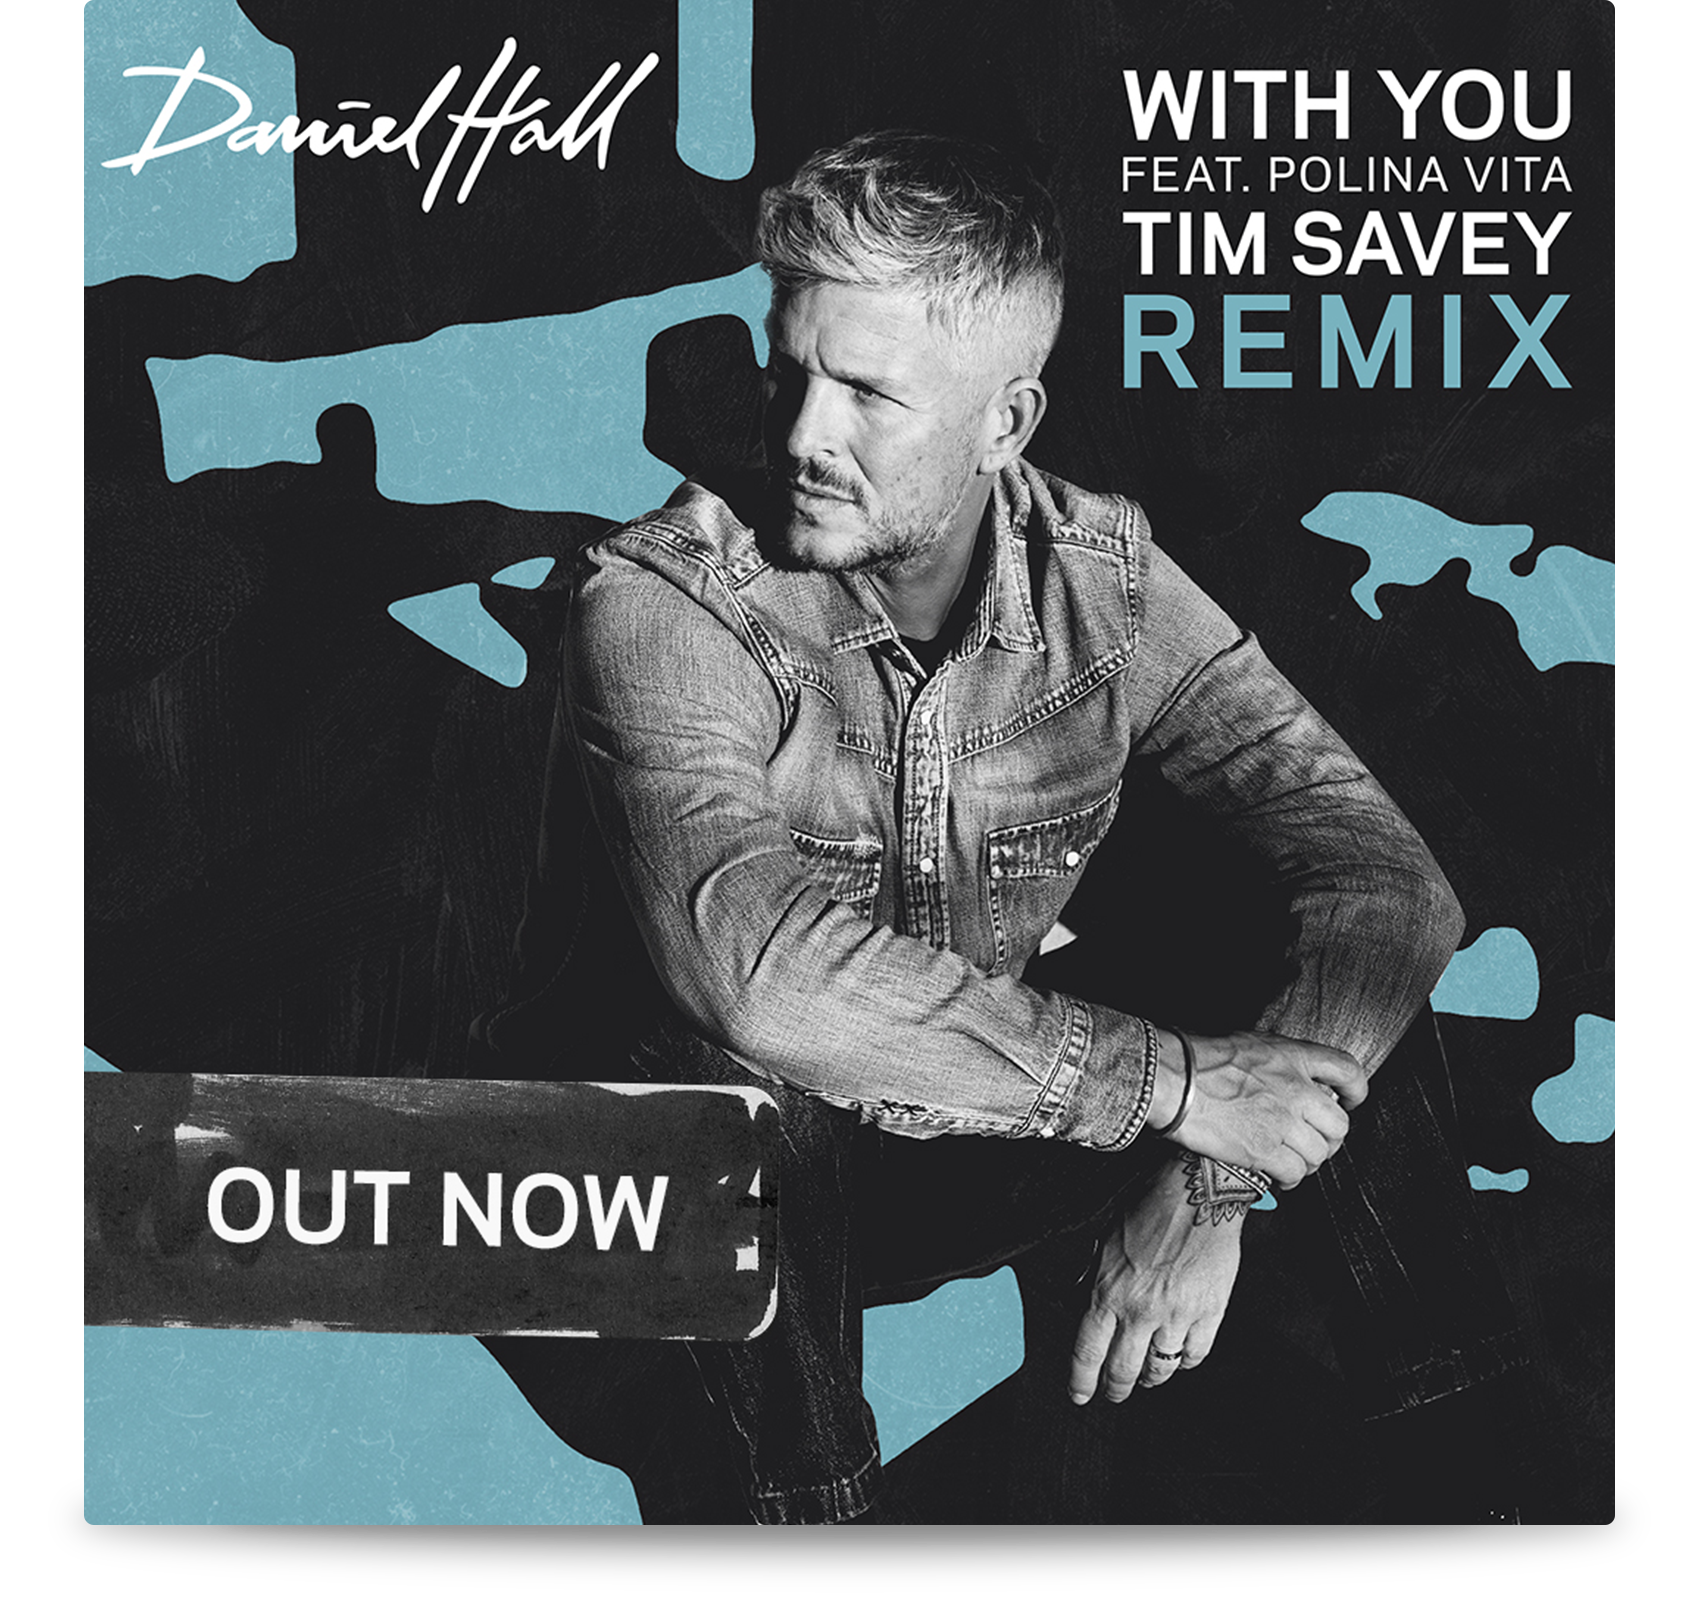 cover_daniel-hall_with-you_tim-savey-remix